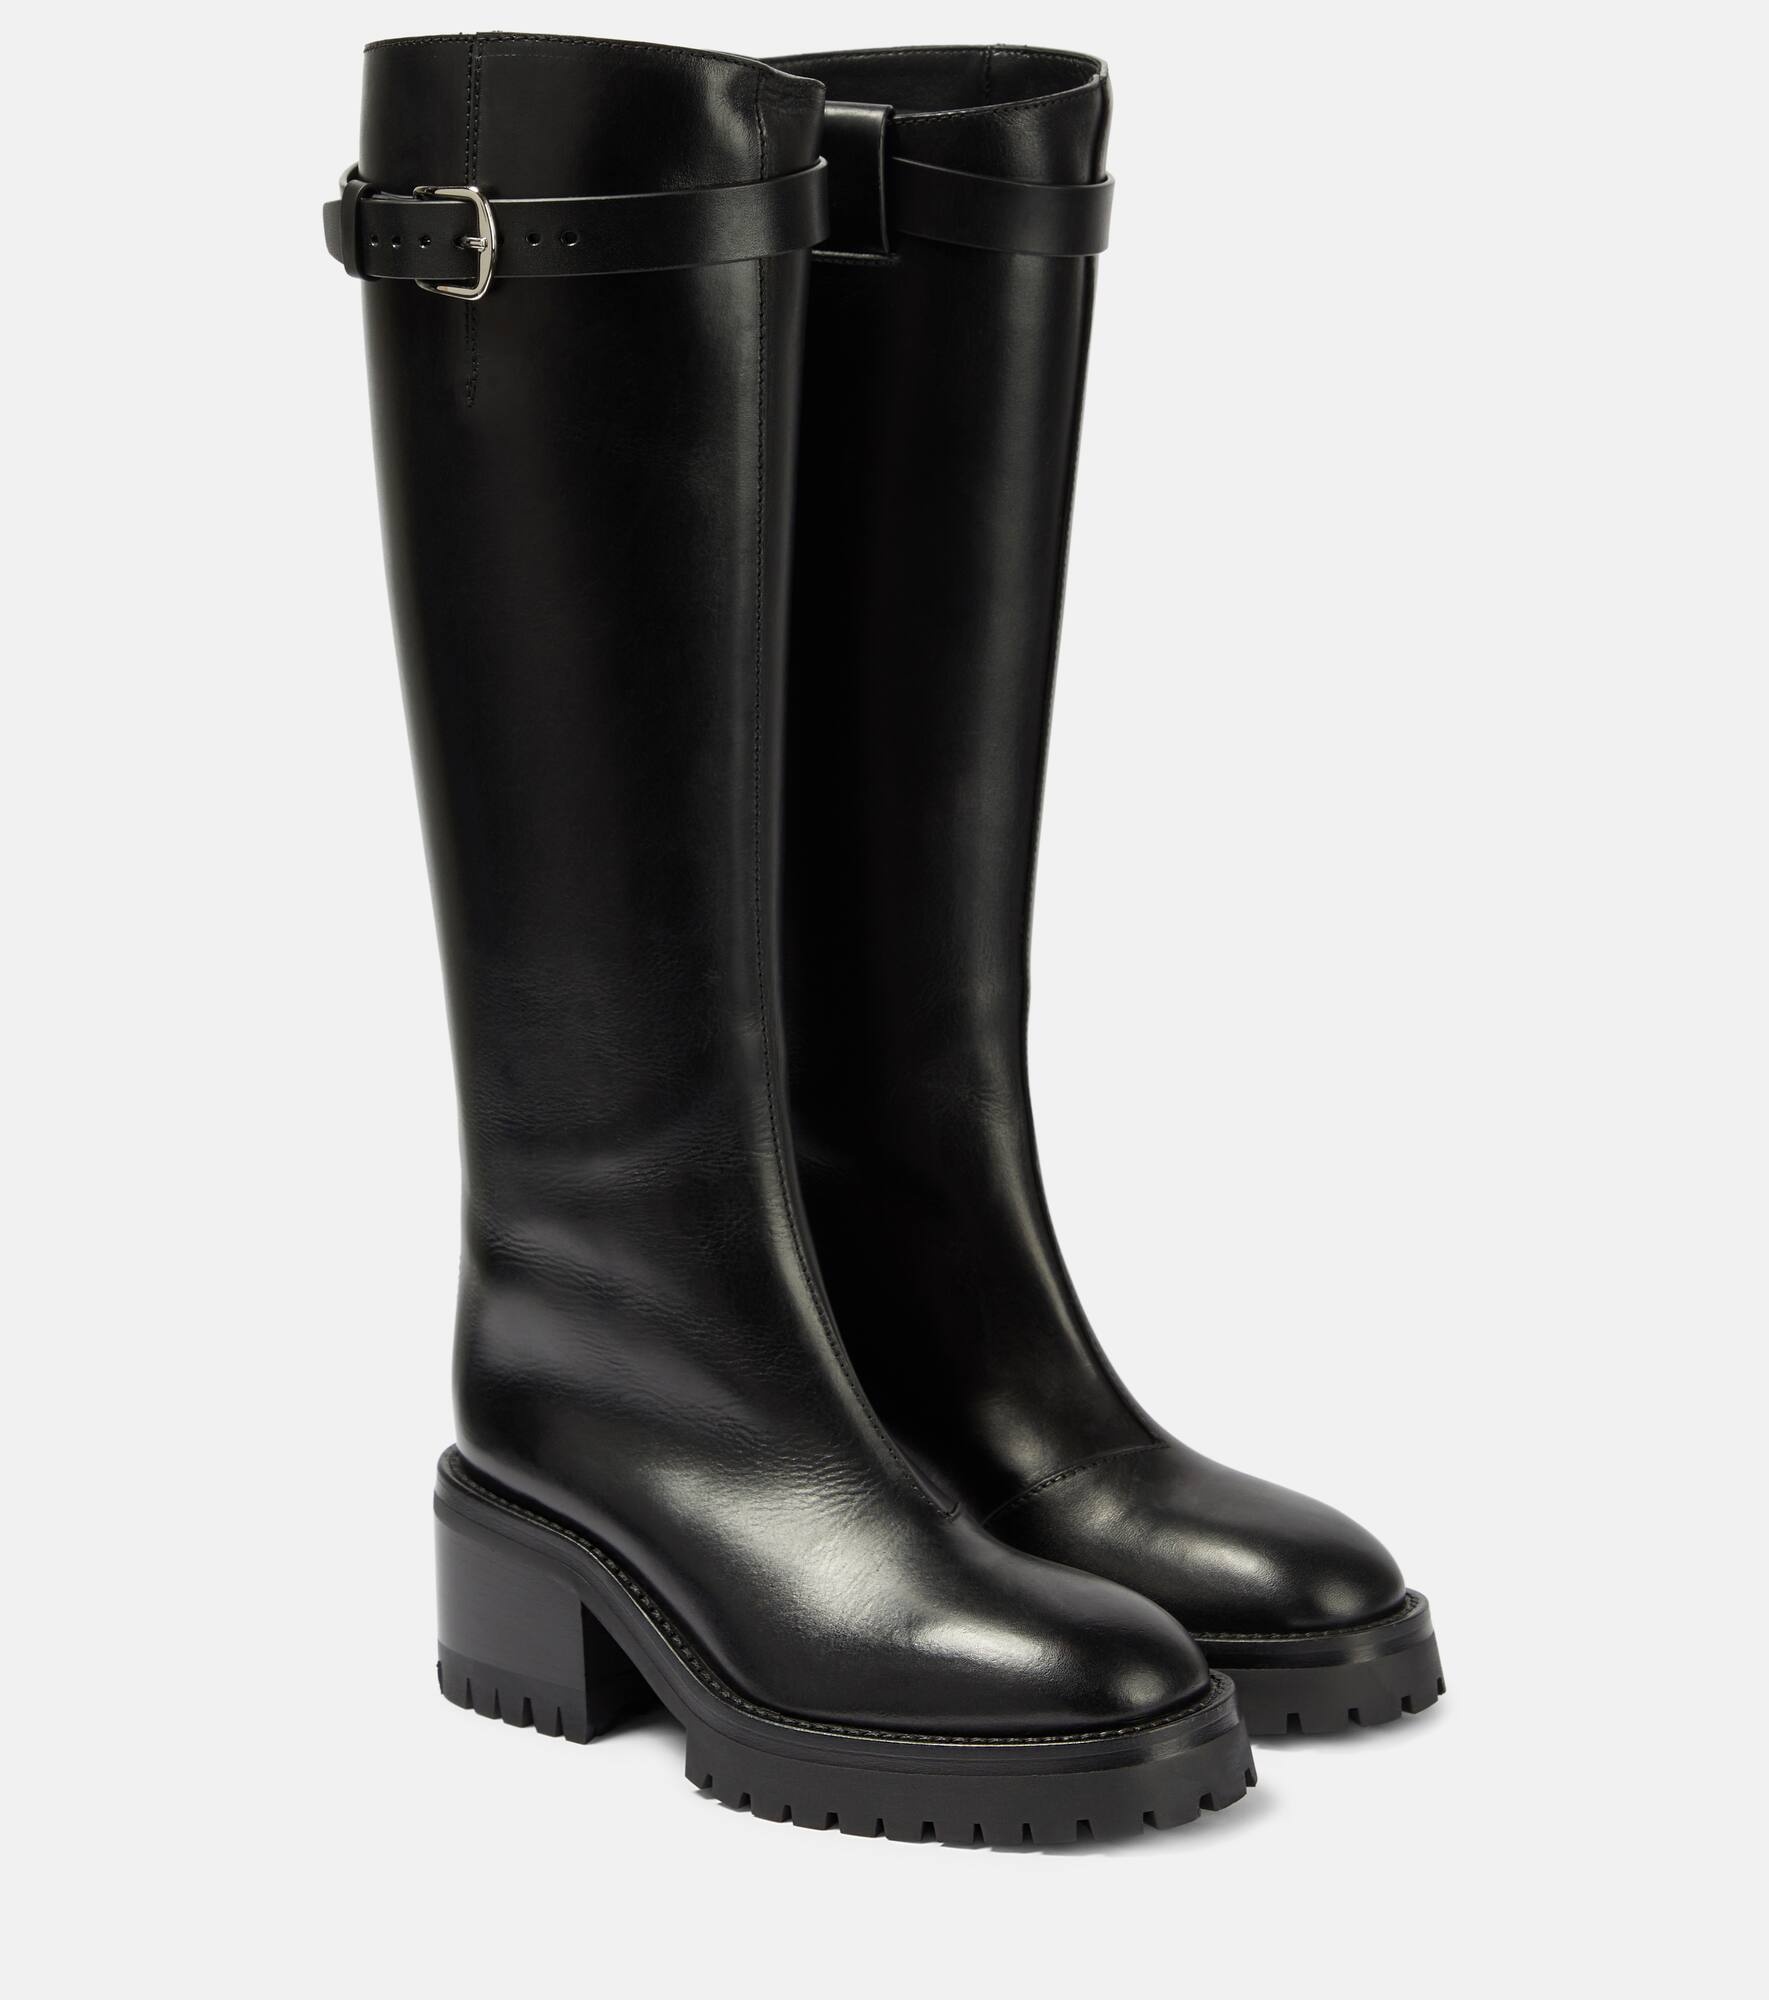 Tanse leather knee-high riding boots - 1